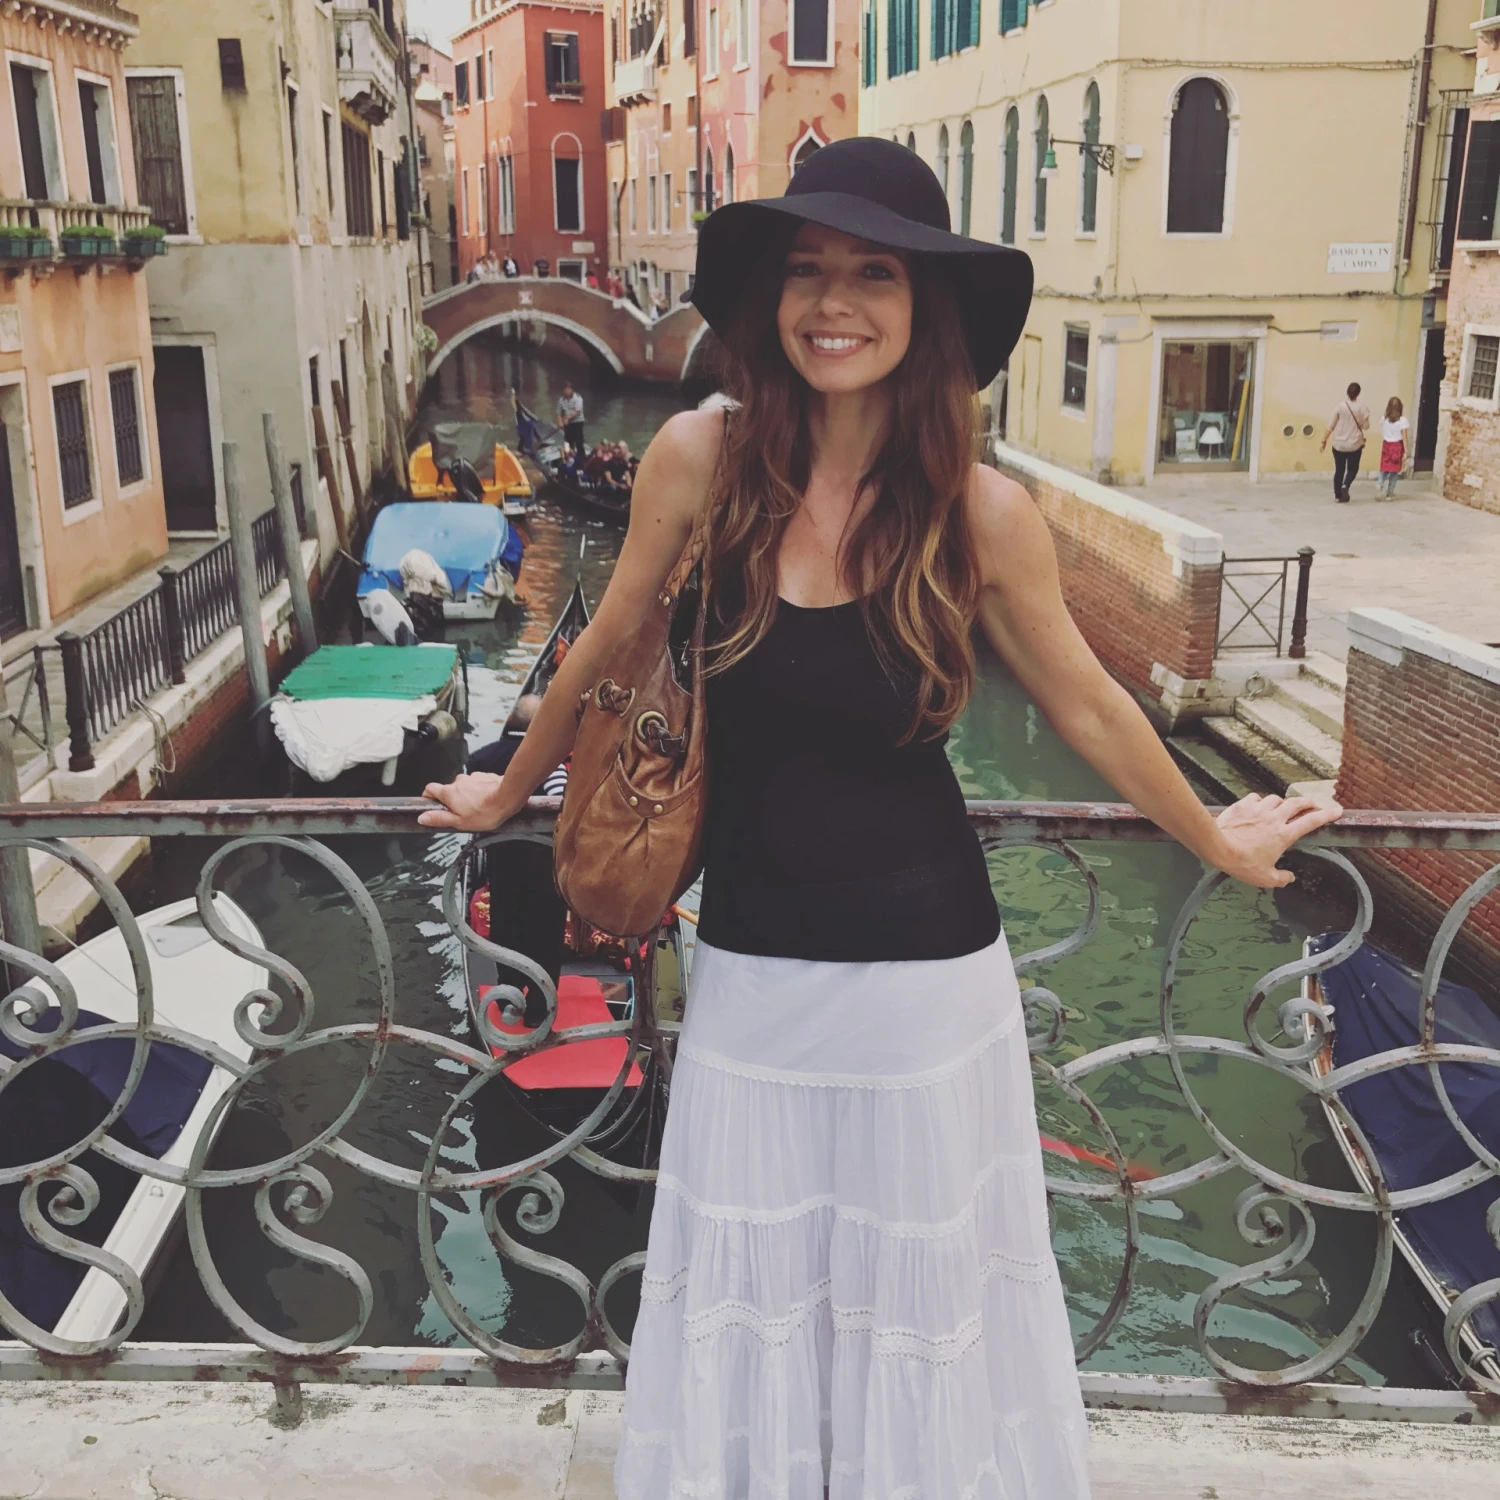 All smiles at the Venice Grand Canal